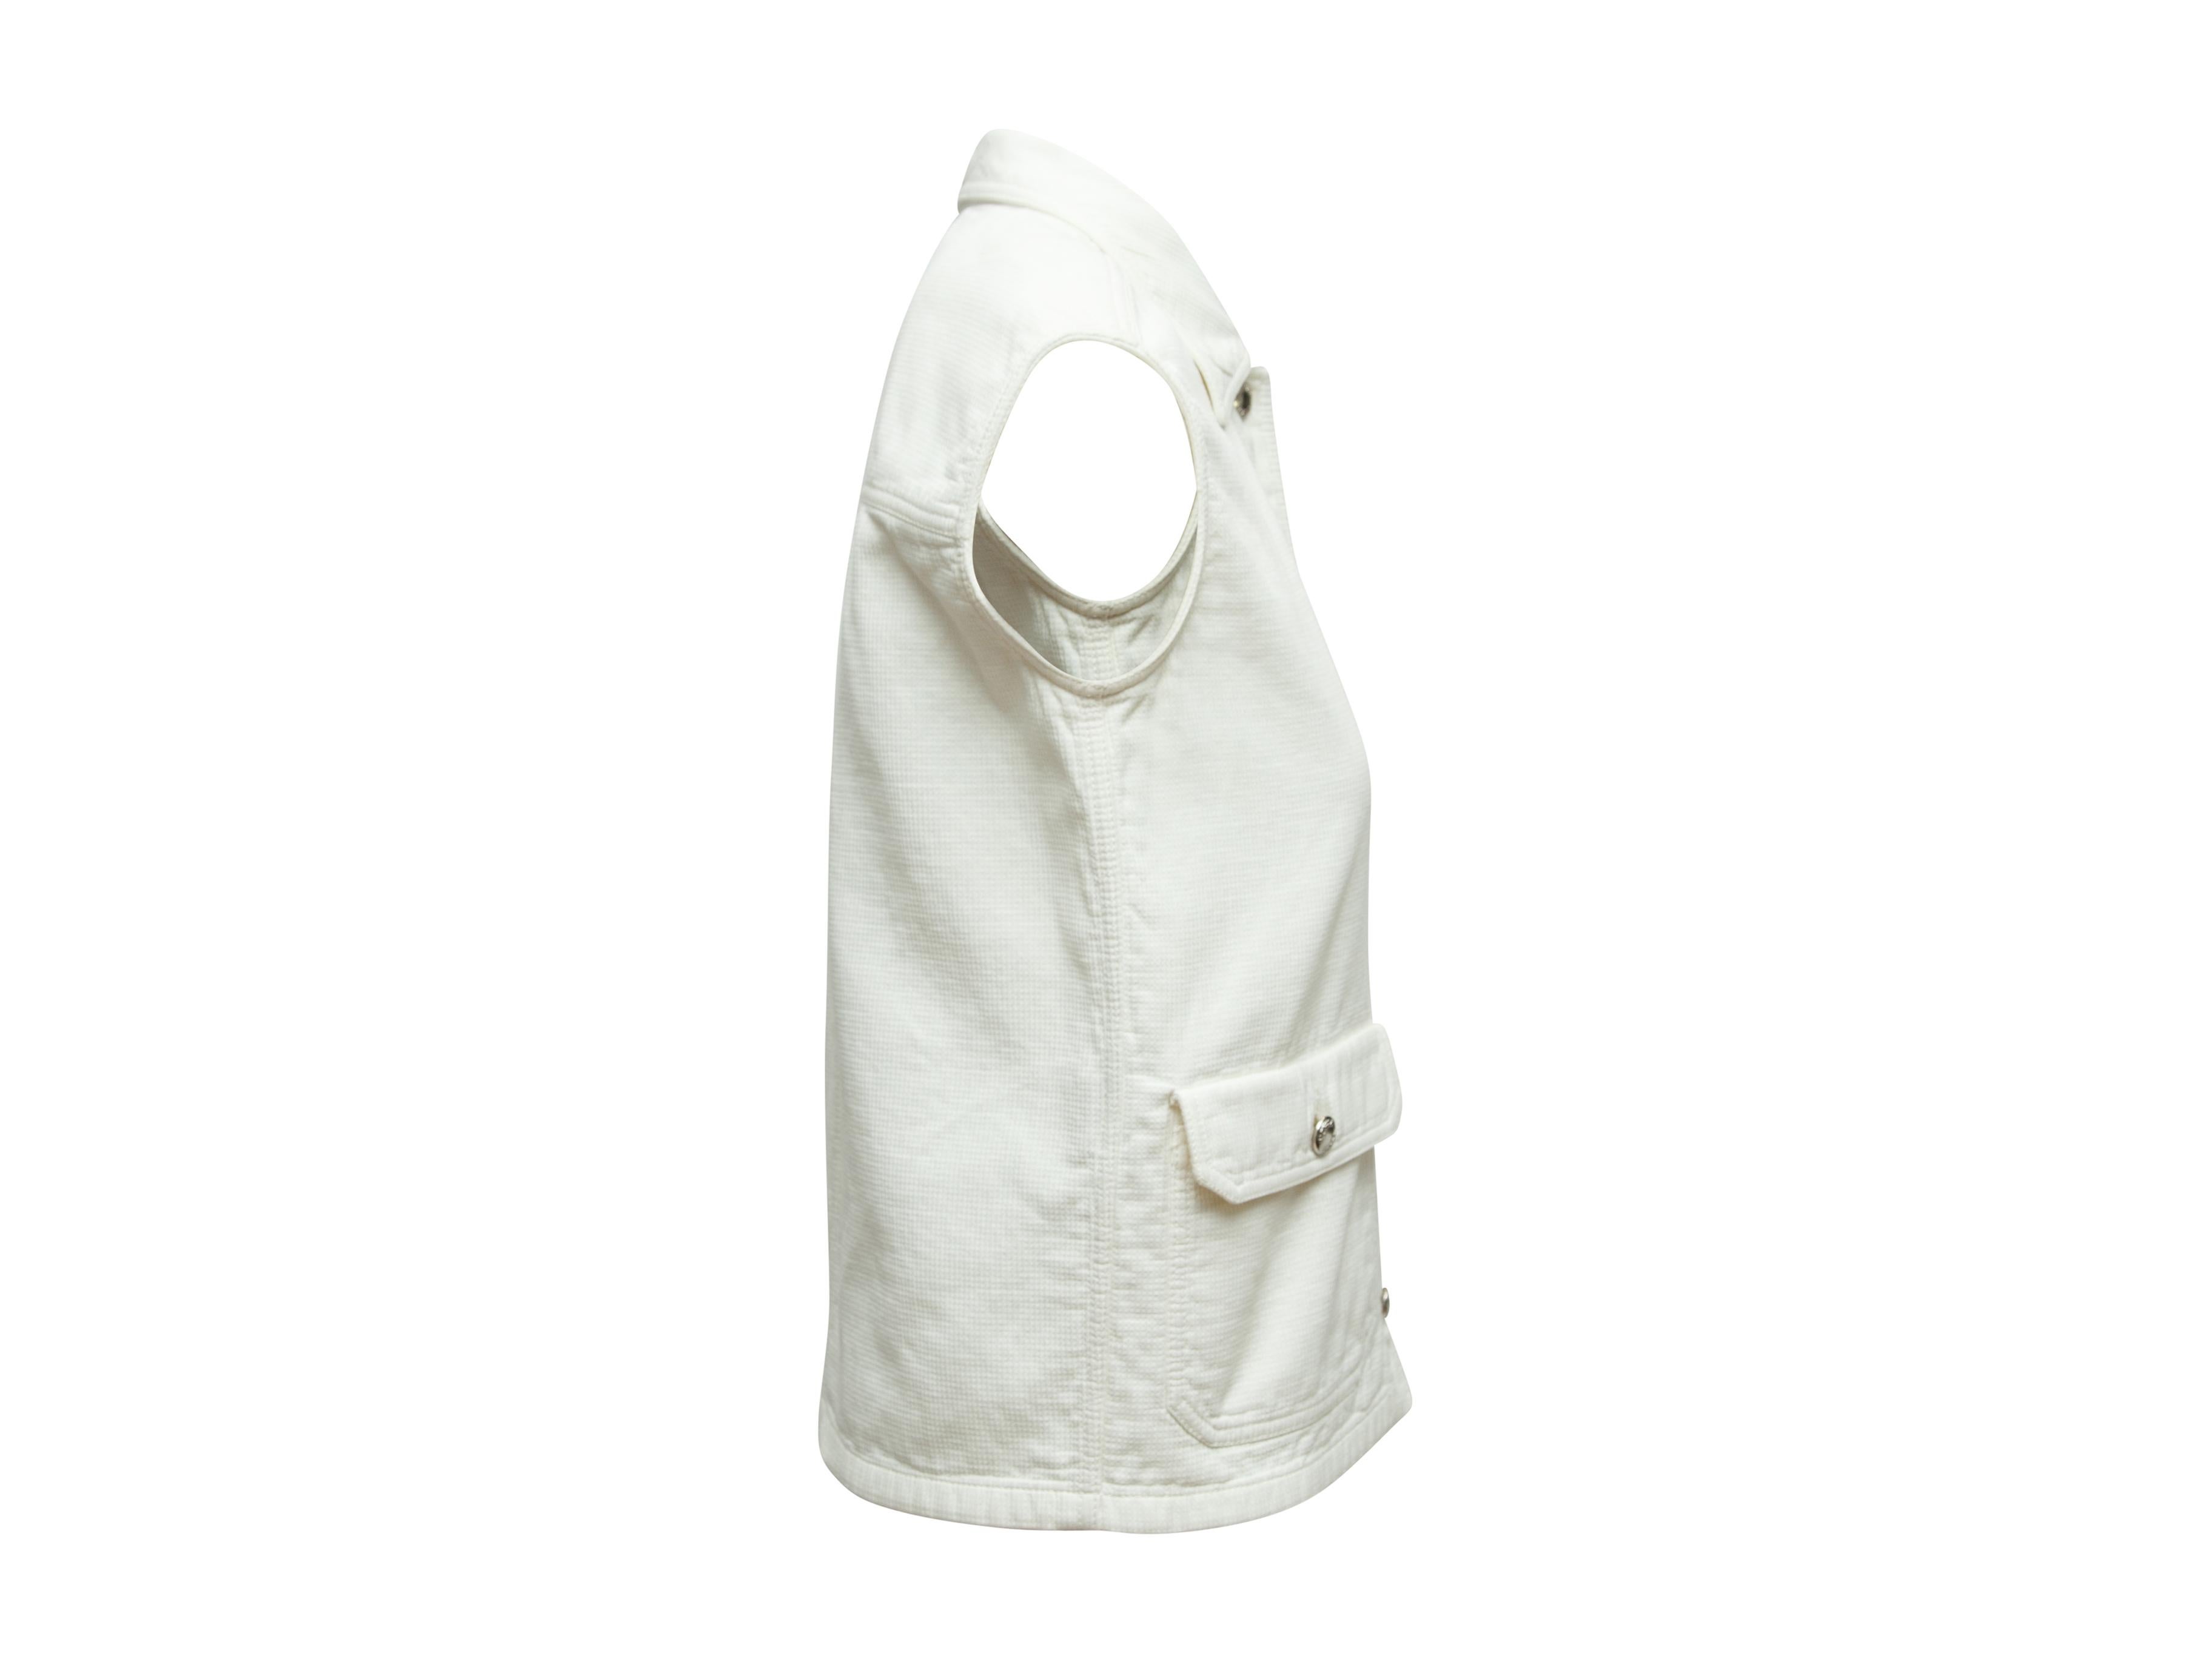 Product details: Vintage white vest by Prada. Pointed collar. Dual pockets. Button closures at center front. 36